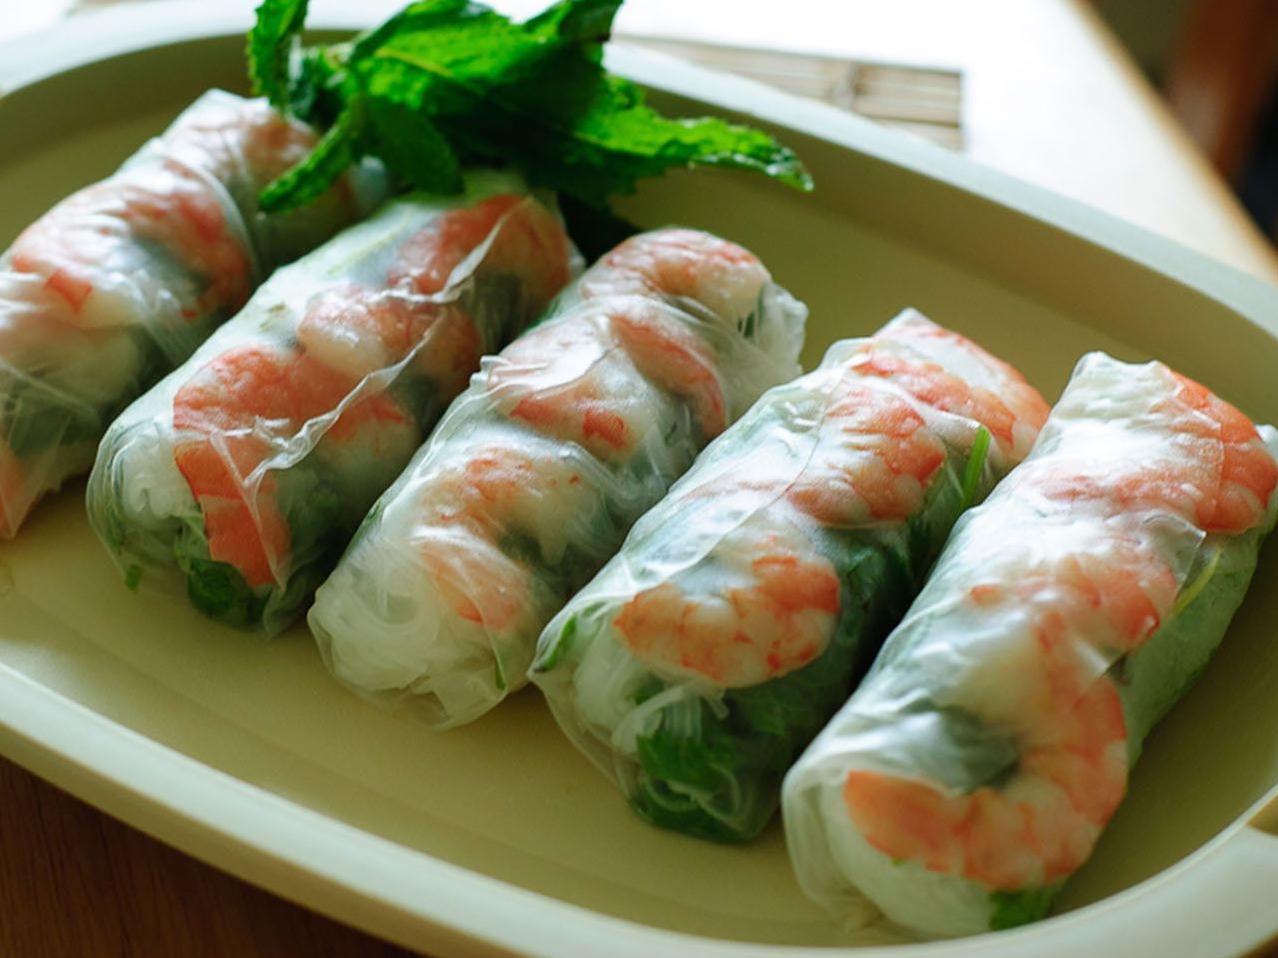  Get ready to feast on these delightful rolls, that are easy to make, and sure to impress.